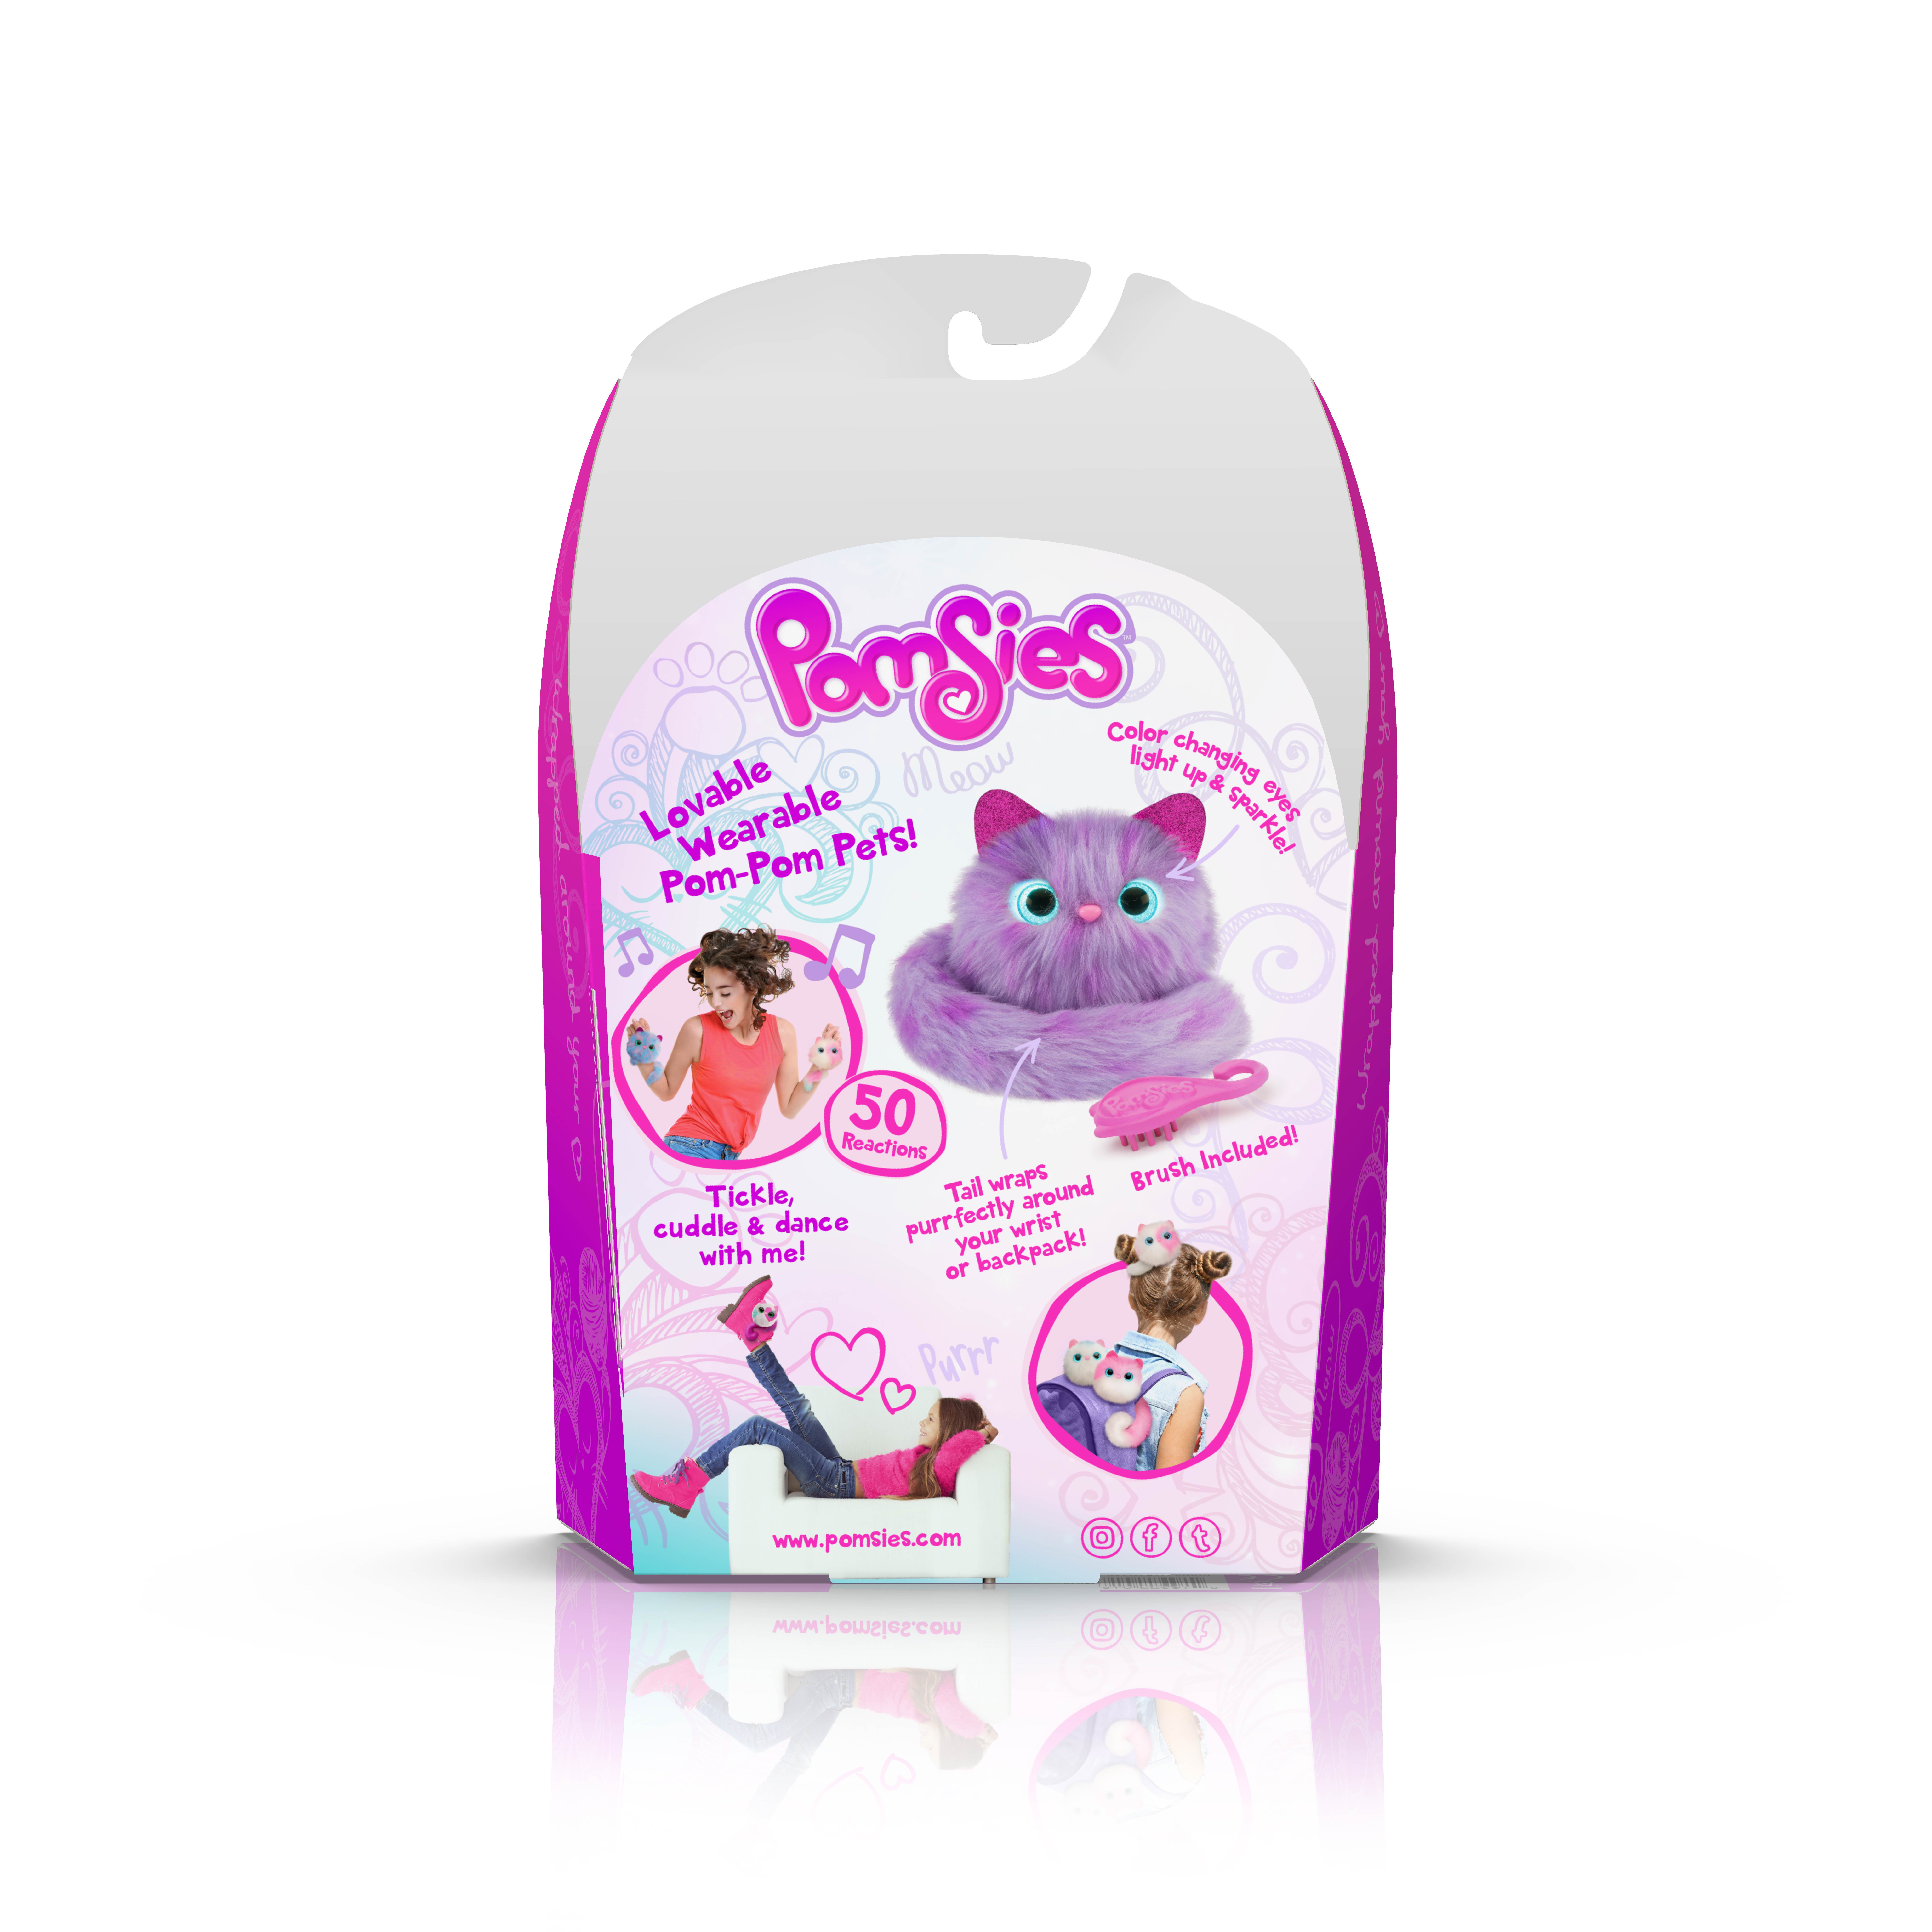 Pomsies Pet Speckles- Plush Interactive Toy - image 2 of 4